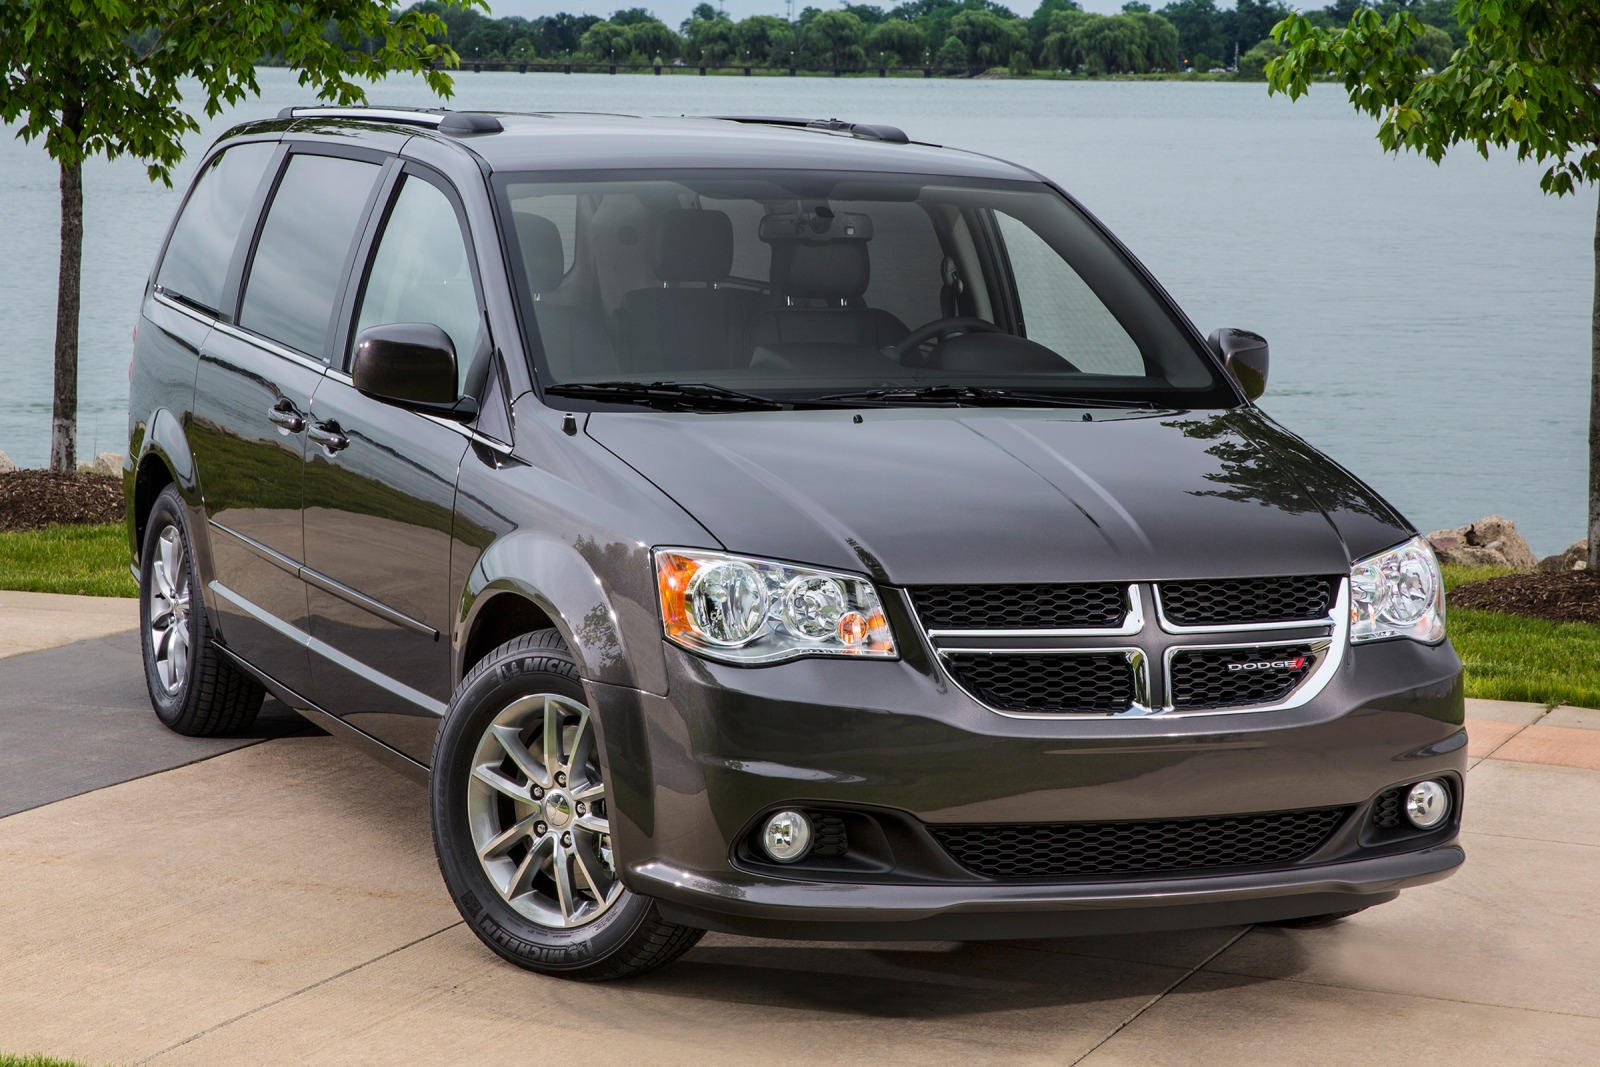 New Or Used, a Dodge Grand Caravan can be Right for You